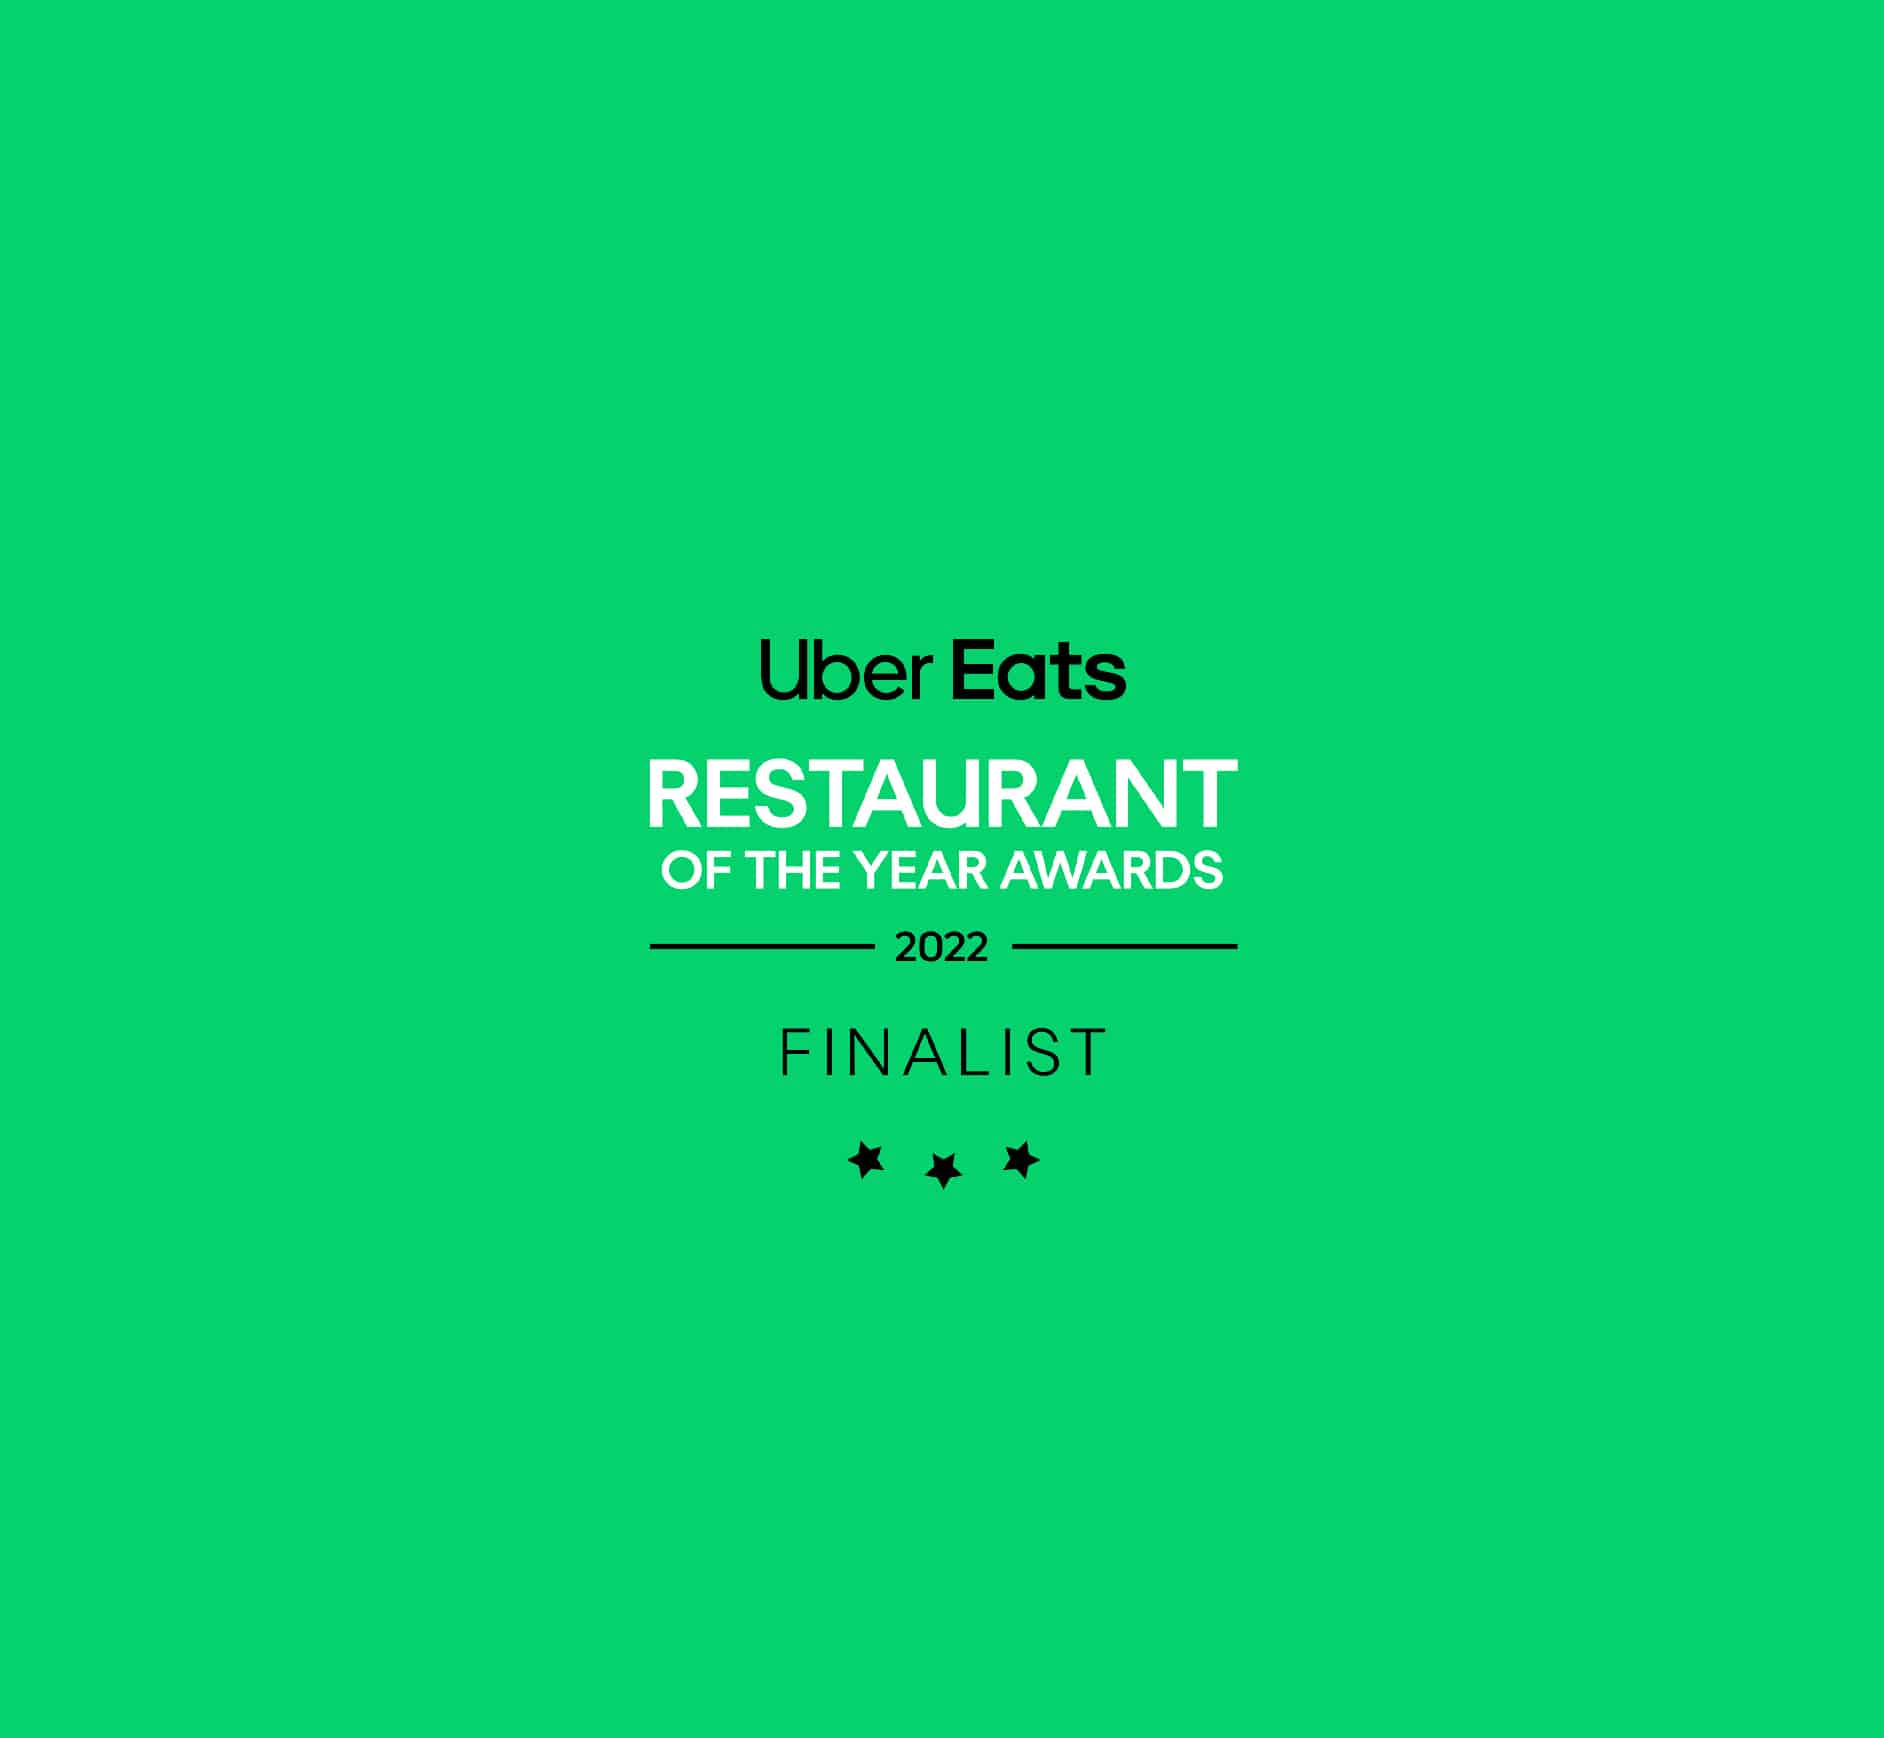 Uber Eats restaurant of the year 2022